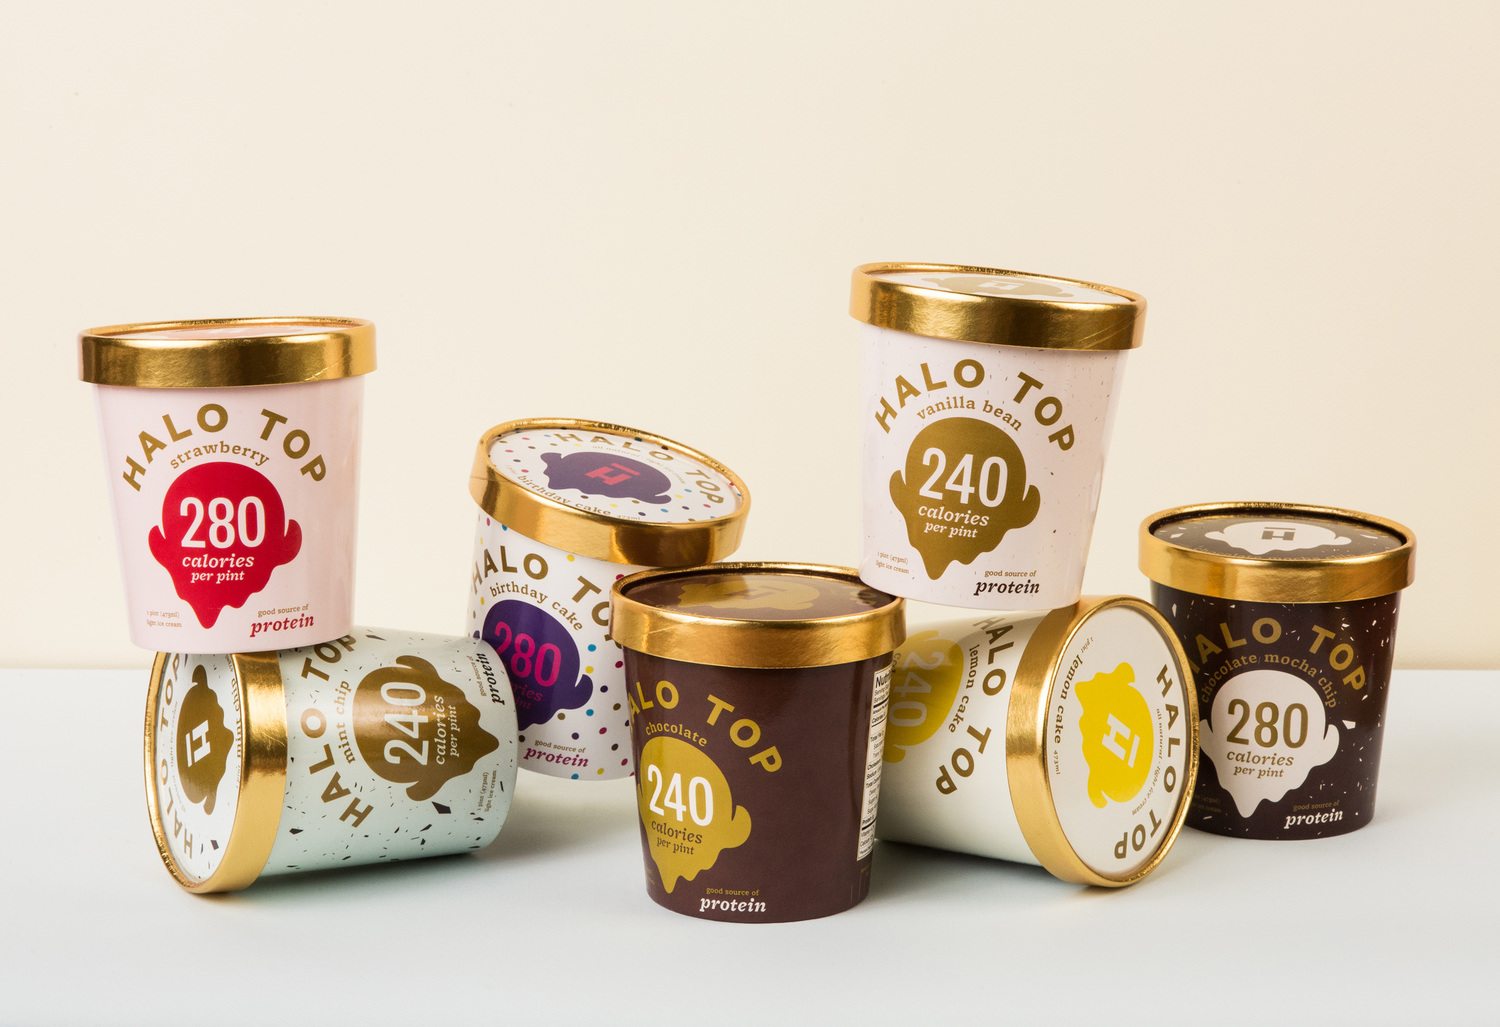 HALO TOP Ice Cream Is Better Than We Could Have Ever Imagined